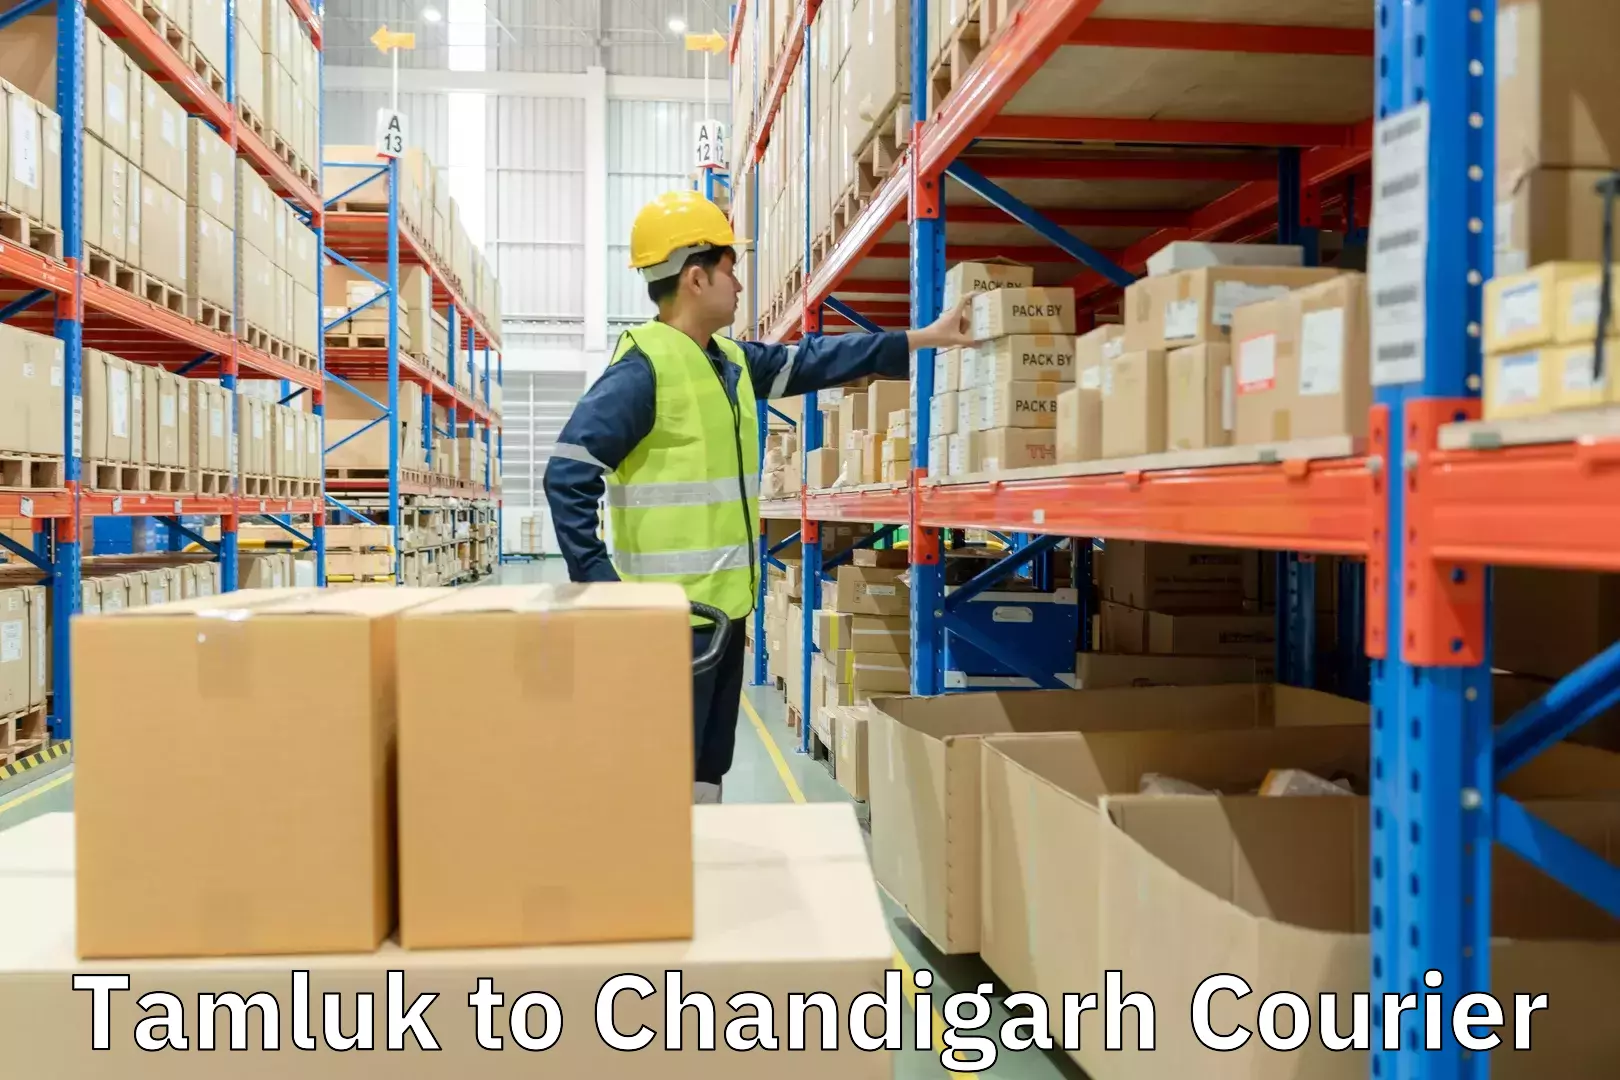 Cash on delivery service Tamluk to Chandigarh